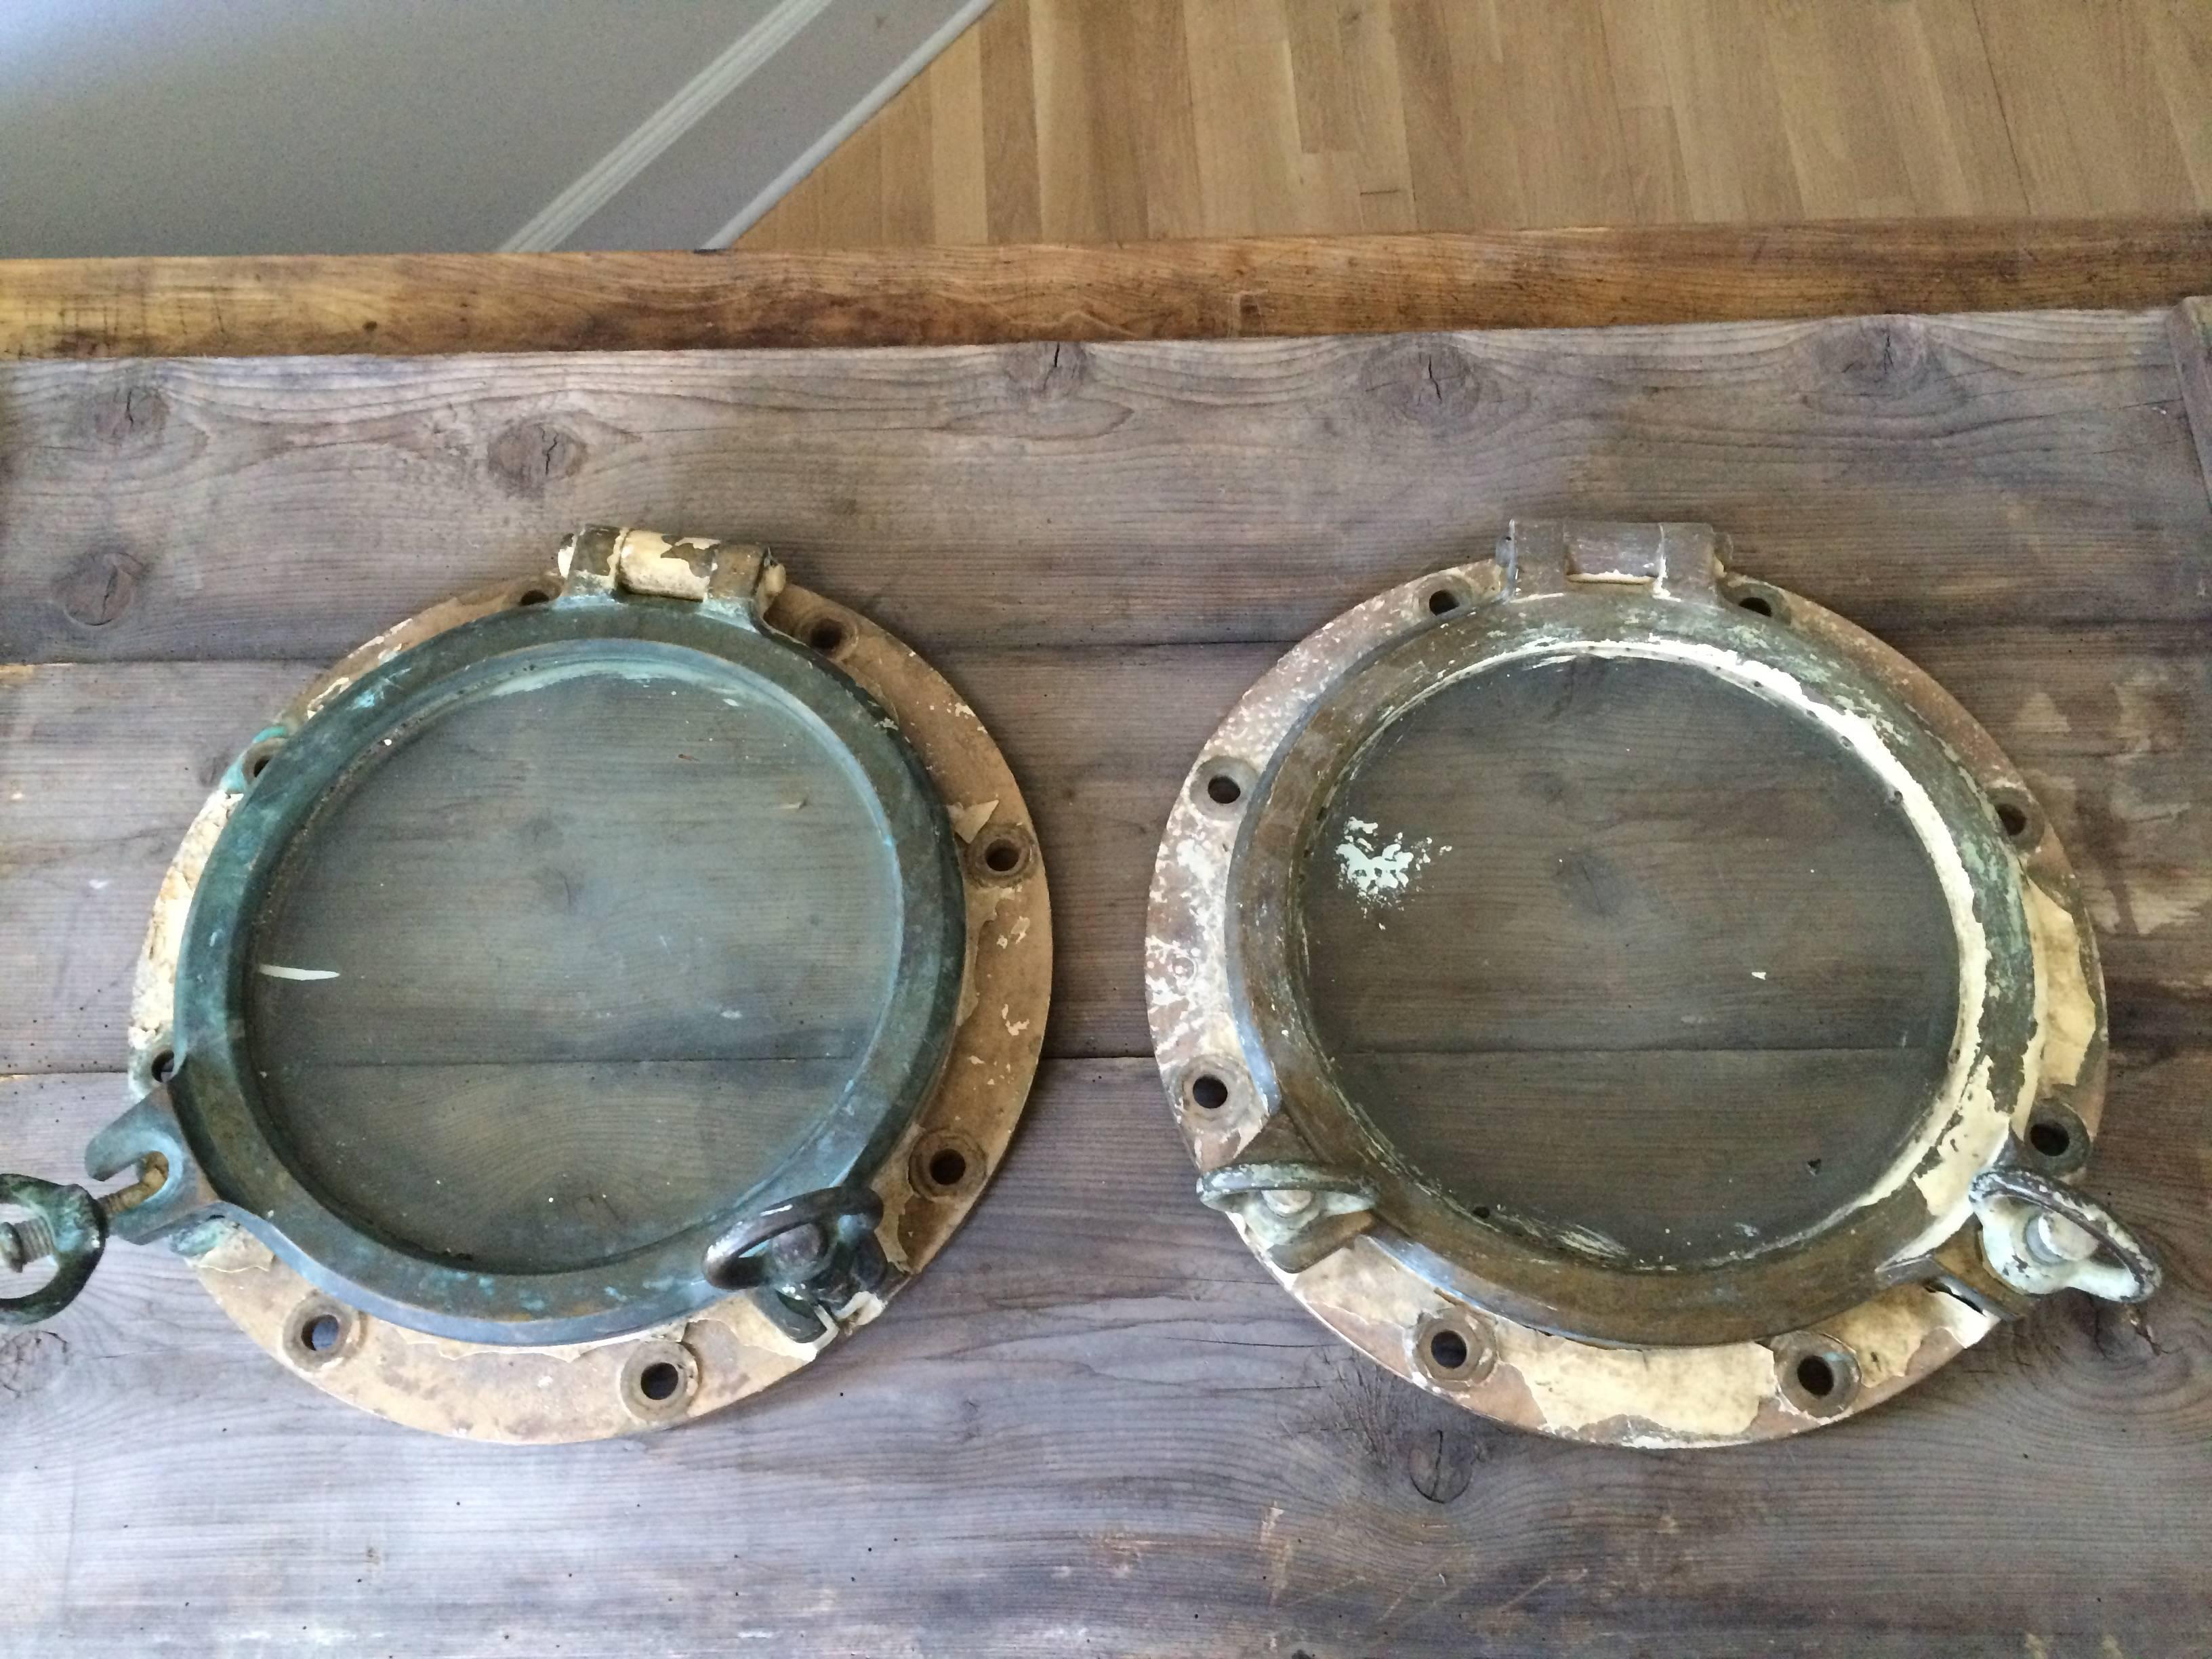 Pair of bronze French portholes from the south of France. They are very heavy and in working order. Would be great cut into a door or wall or made into mirrors.